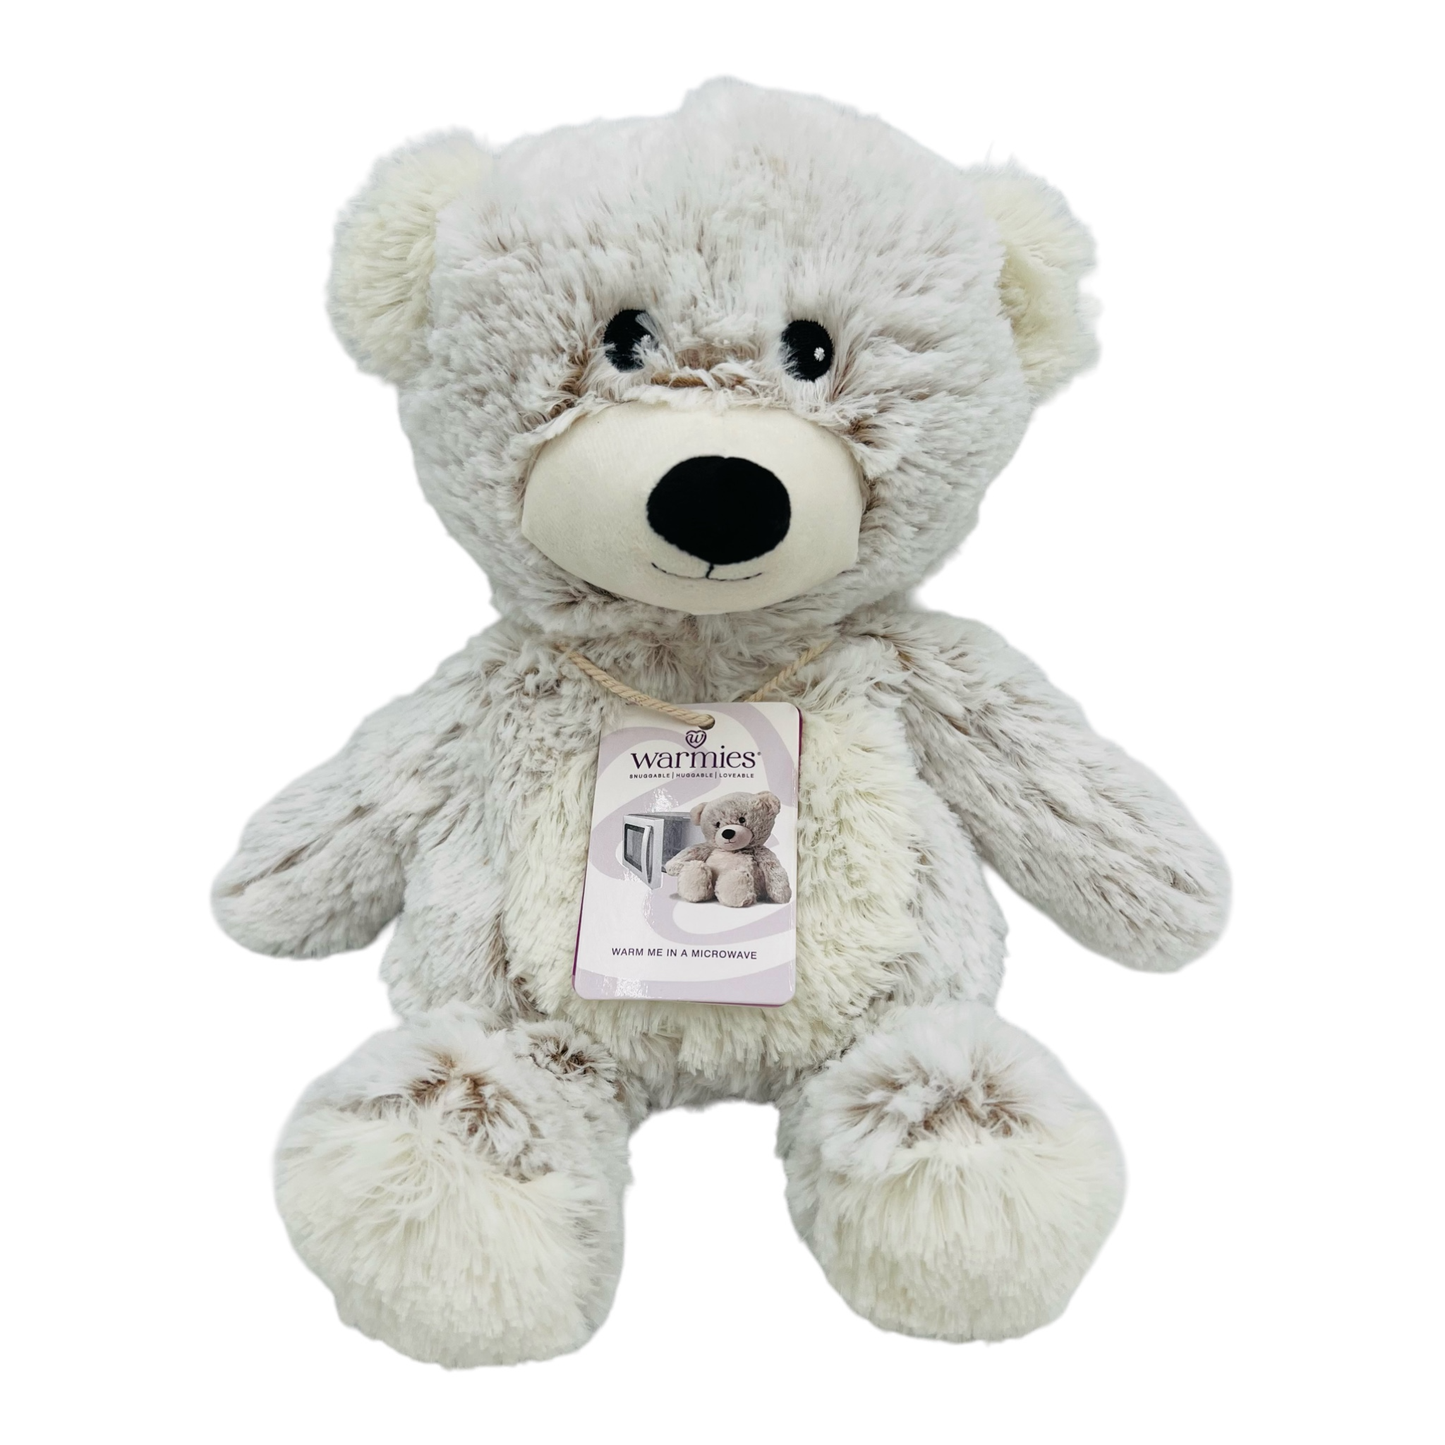 Warmies- Microwavable French Lavender Scented Plush, Marshmallow Bear